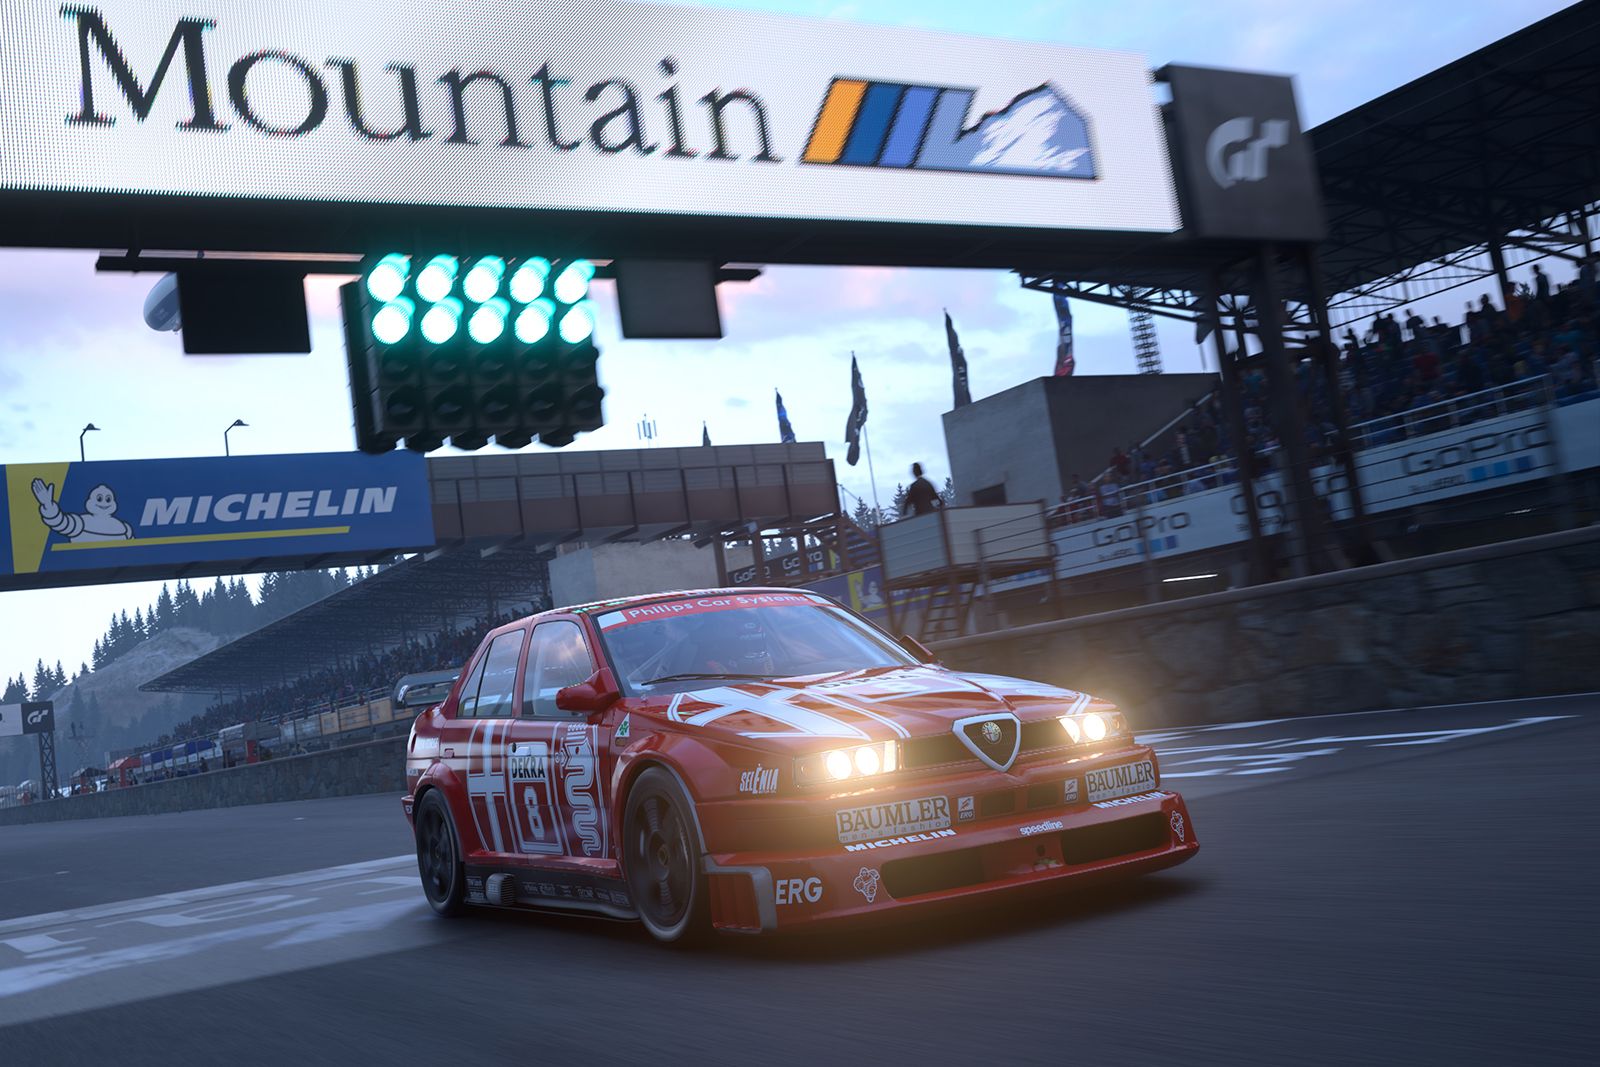 Gran Turismo 7 tips and tricks: Get started with this detailed racing game photo 6